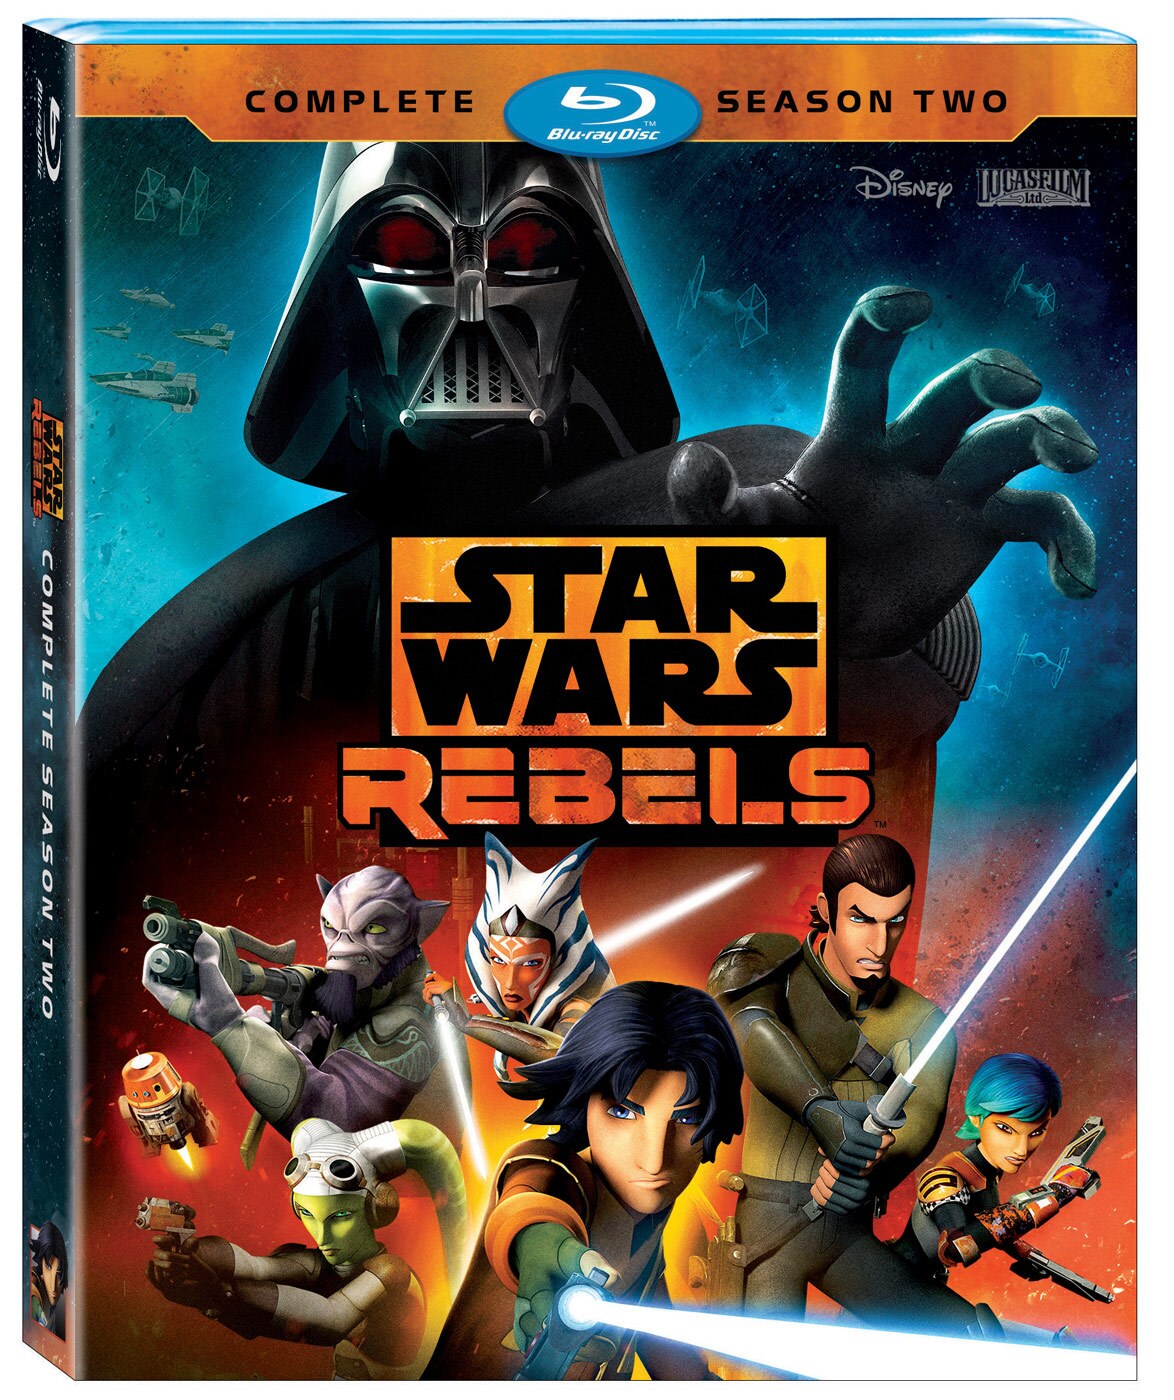 Wars Rebels: Complete Season Coming to Blu-ray and | .com